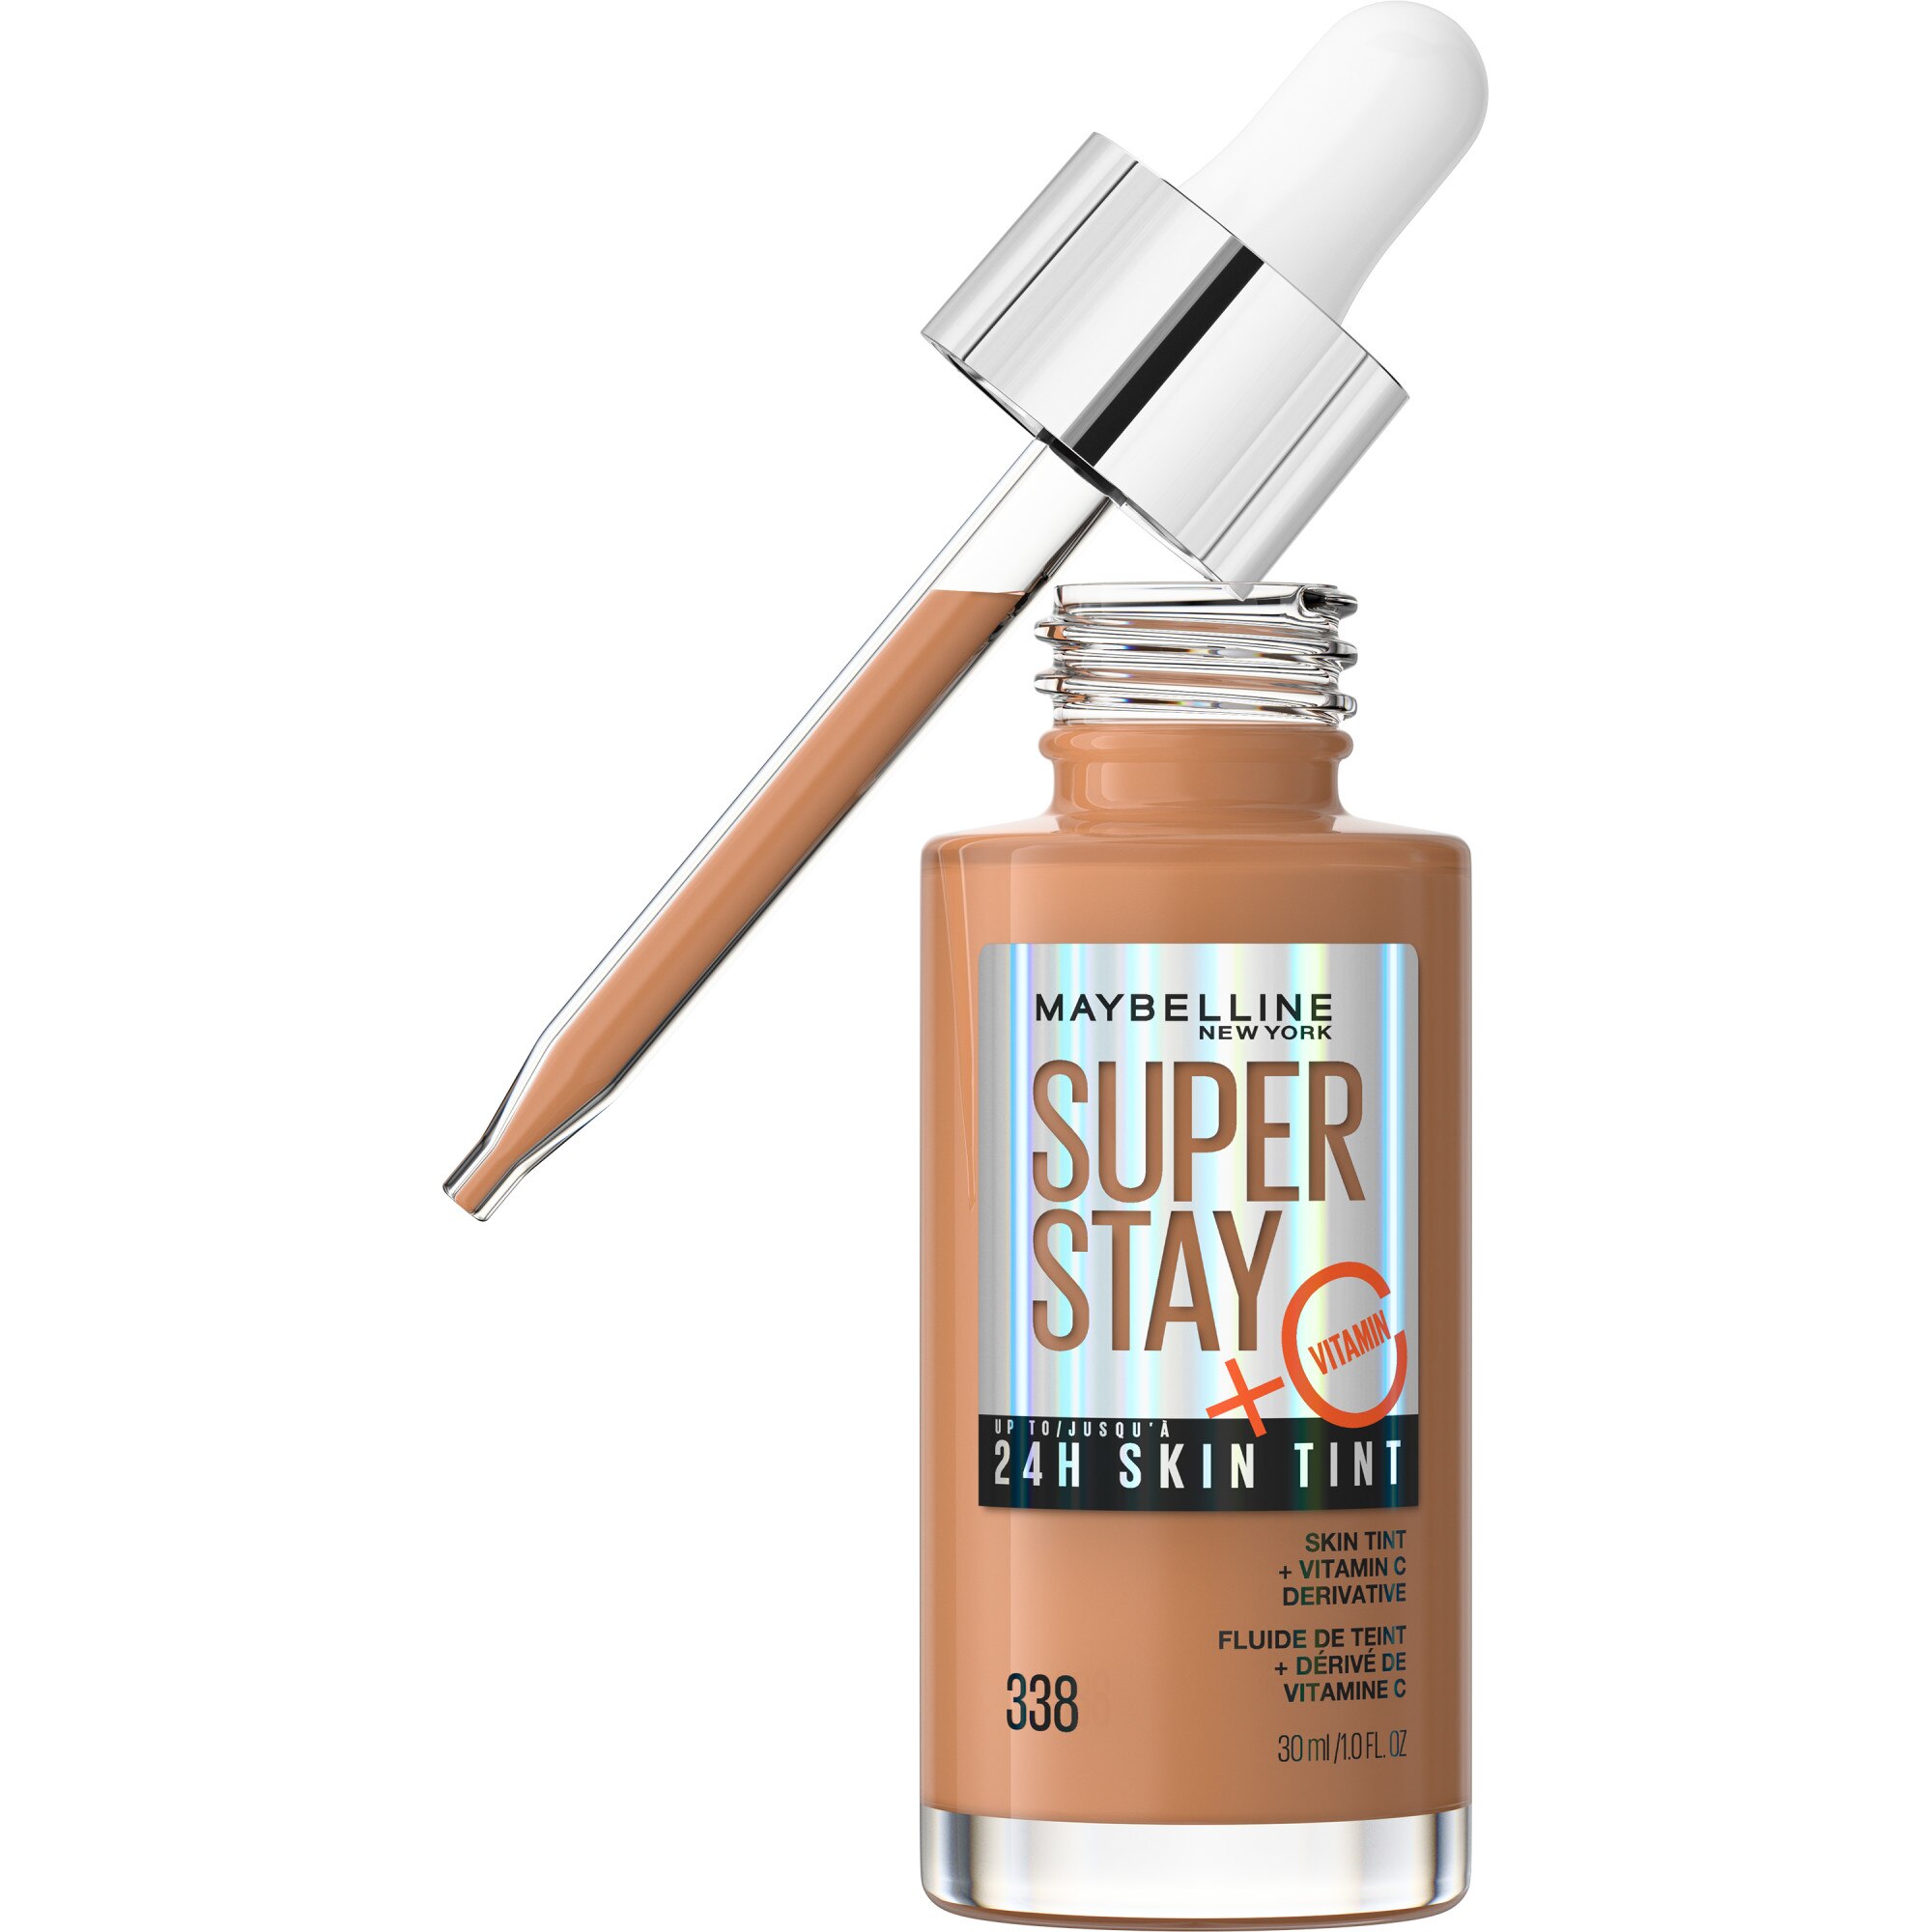 Maybelline New York Super Stay Up To 24HR Skin Tint With Vitamin C, 338, 1 Oz , CVS